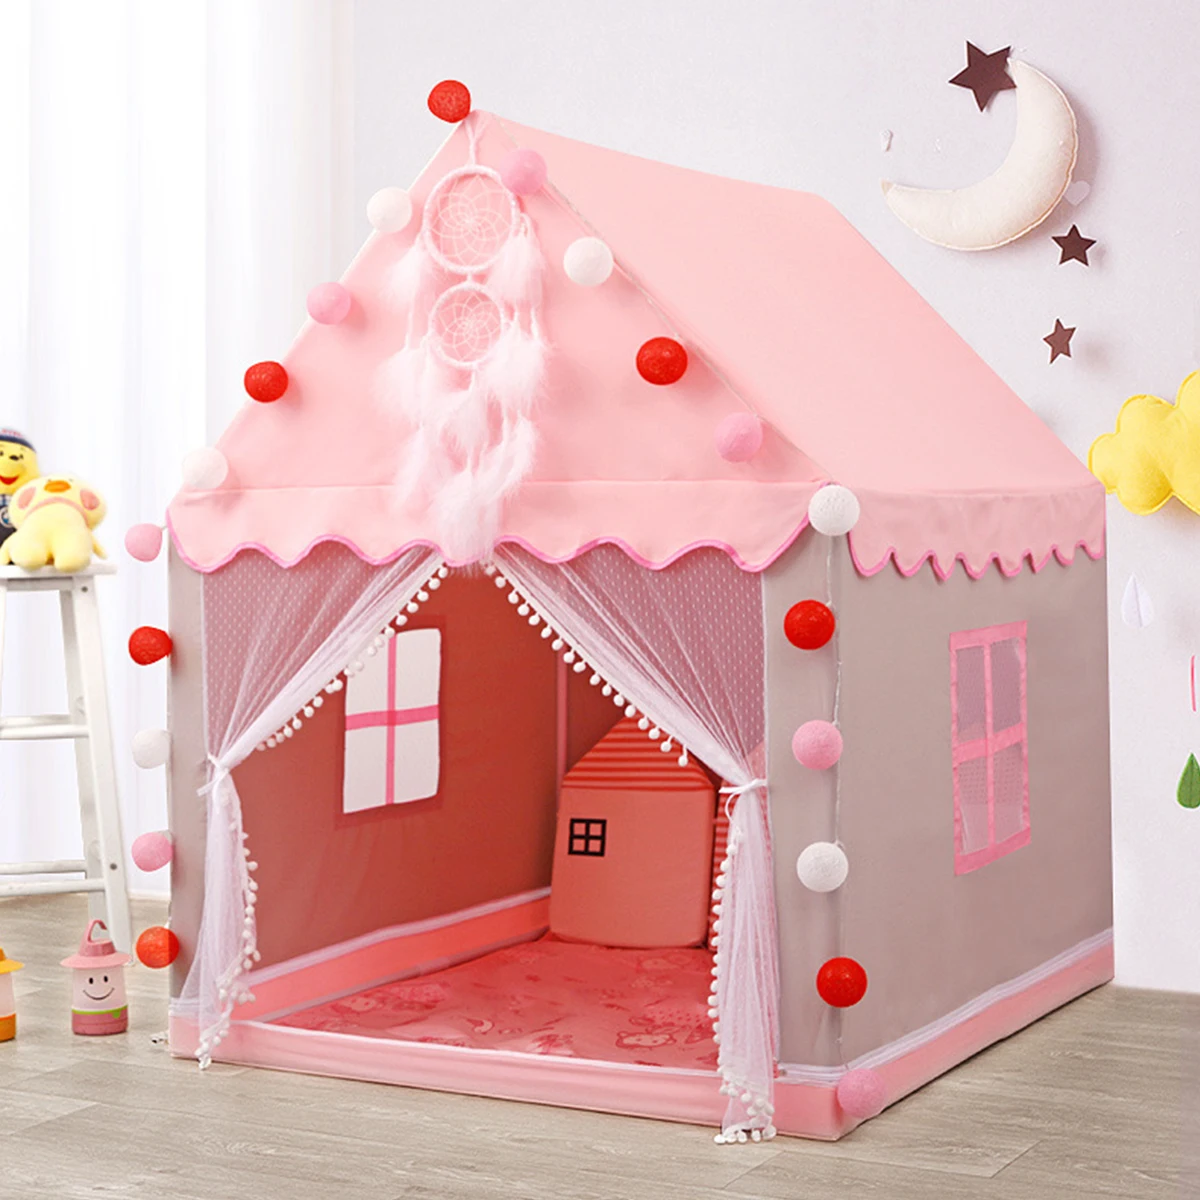 Children Play Tent Princess Castle House Cartoon Game Room Easy Assemble Playhouse Tent Toys Gifts for Kids Indoor and Outdoor folding tipi children tent play house lovely girls princess castle outdoor indoor playhouse waterproof toy tents for kids gifts